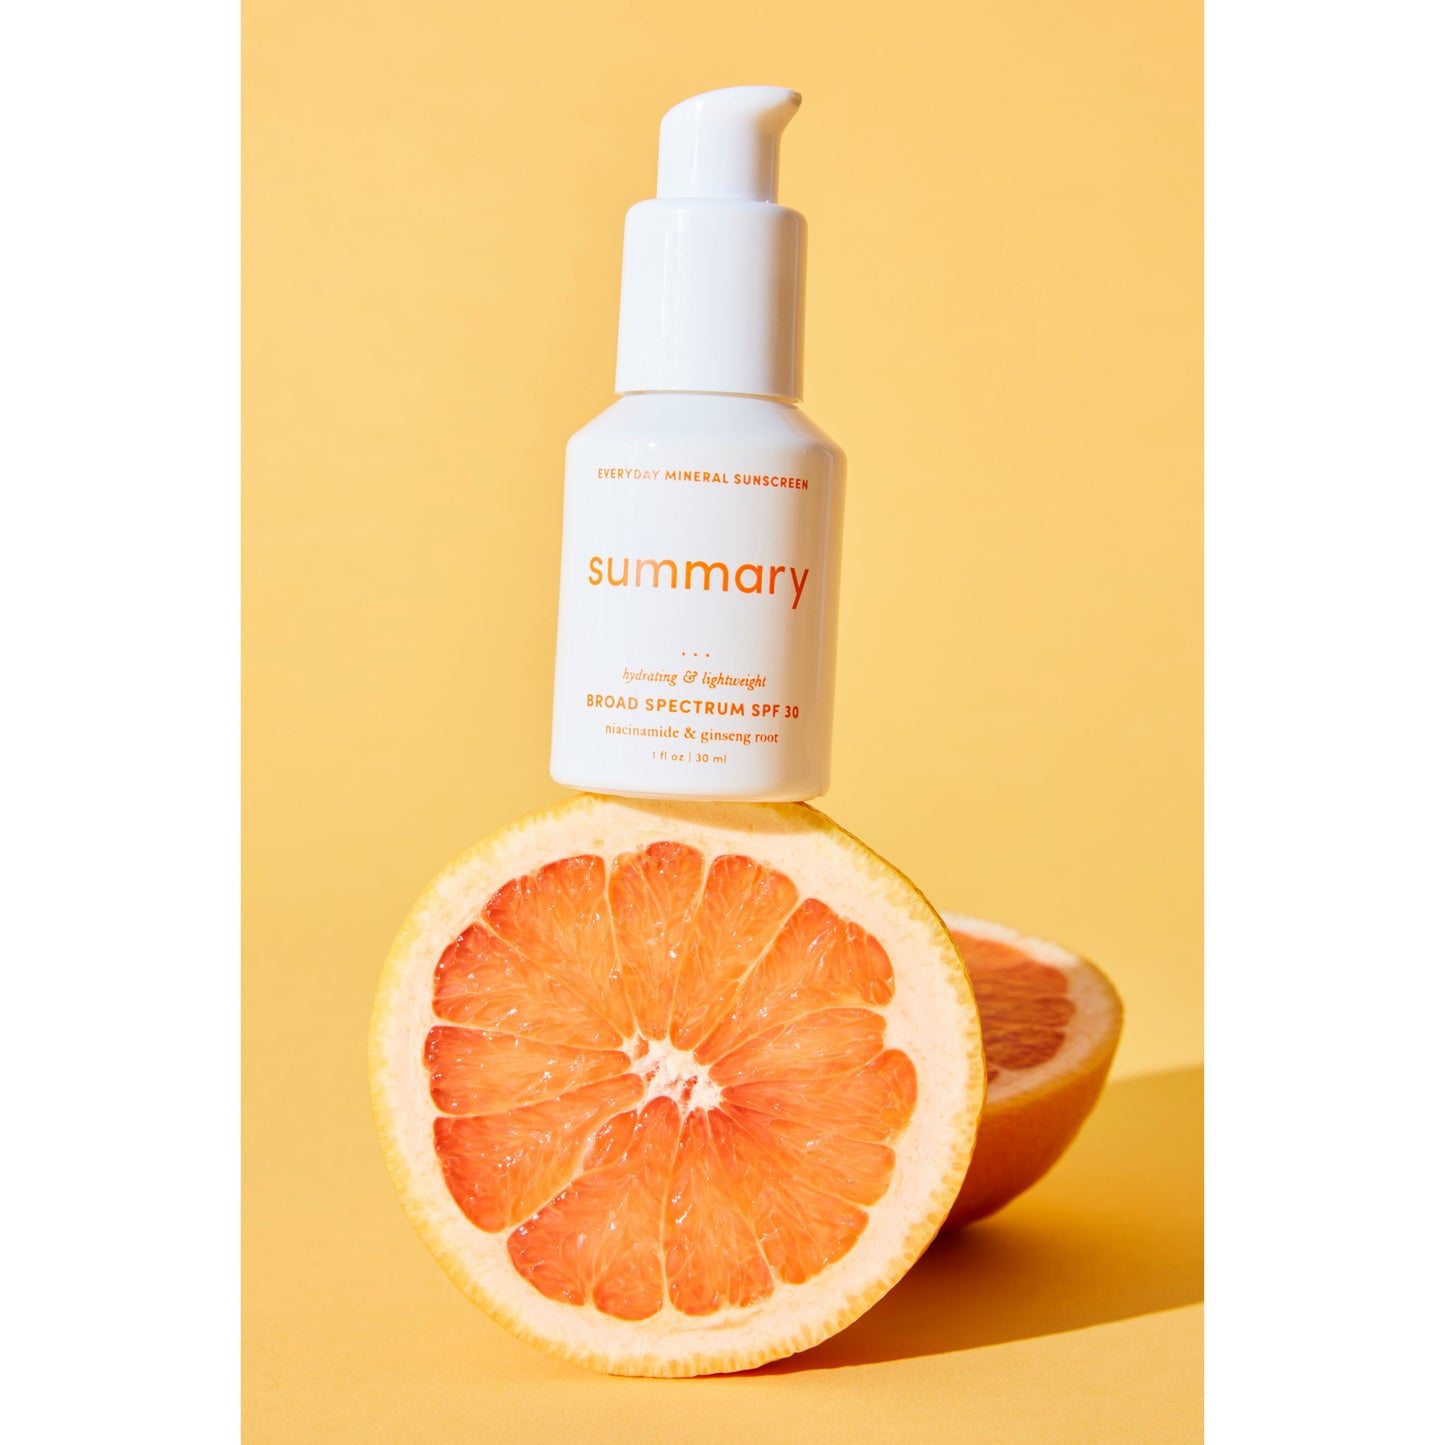 A bottle of "Free People Movement" brand Summary SPF 30 broad spectrum mineral-based sunscreen placed behind a sliced grapefruit, set against a yellow background.